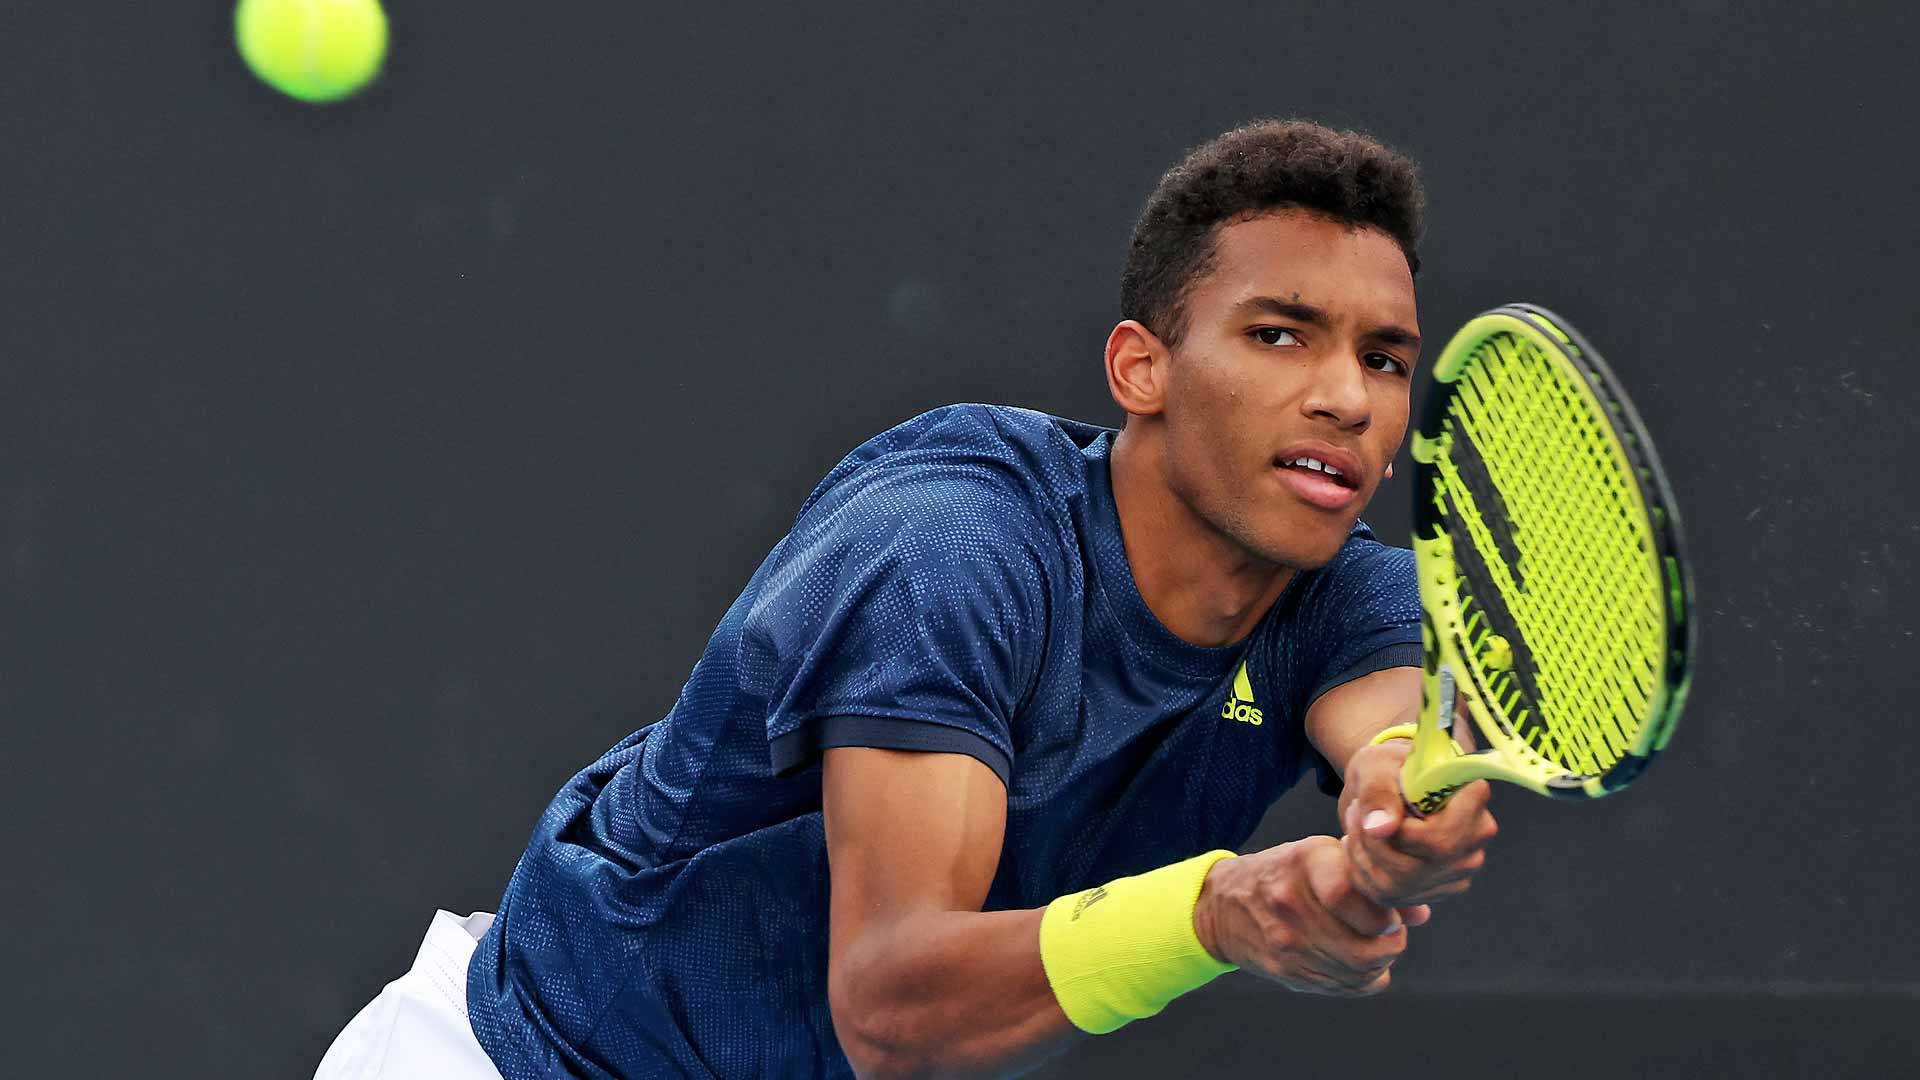 Canadian Tennis Prodigy Felix Auger Aliassime in a Mood Wallpaper